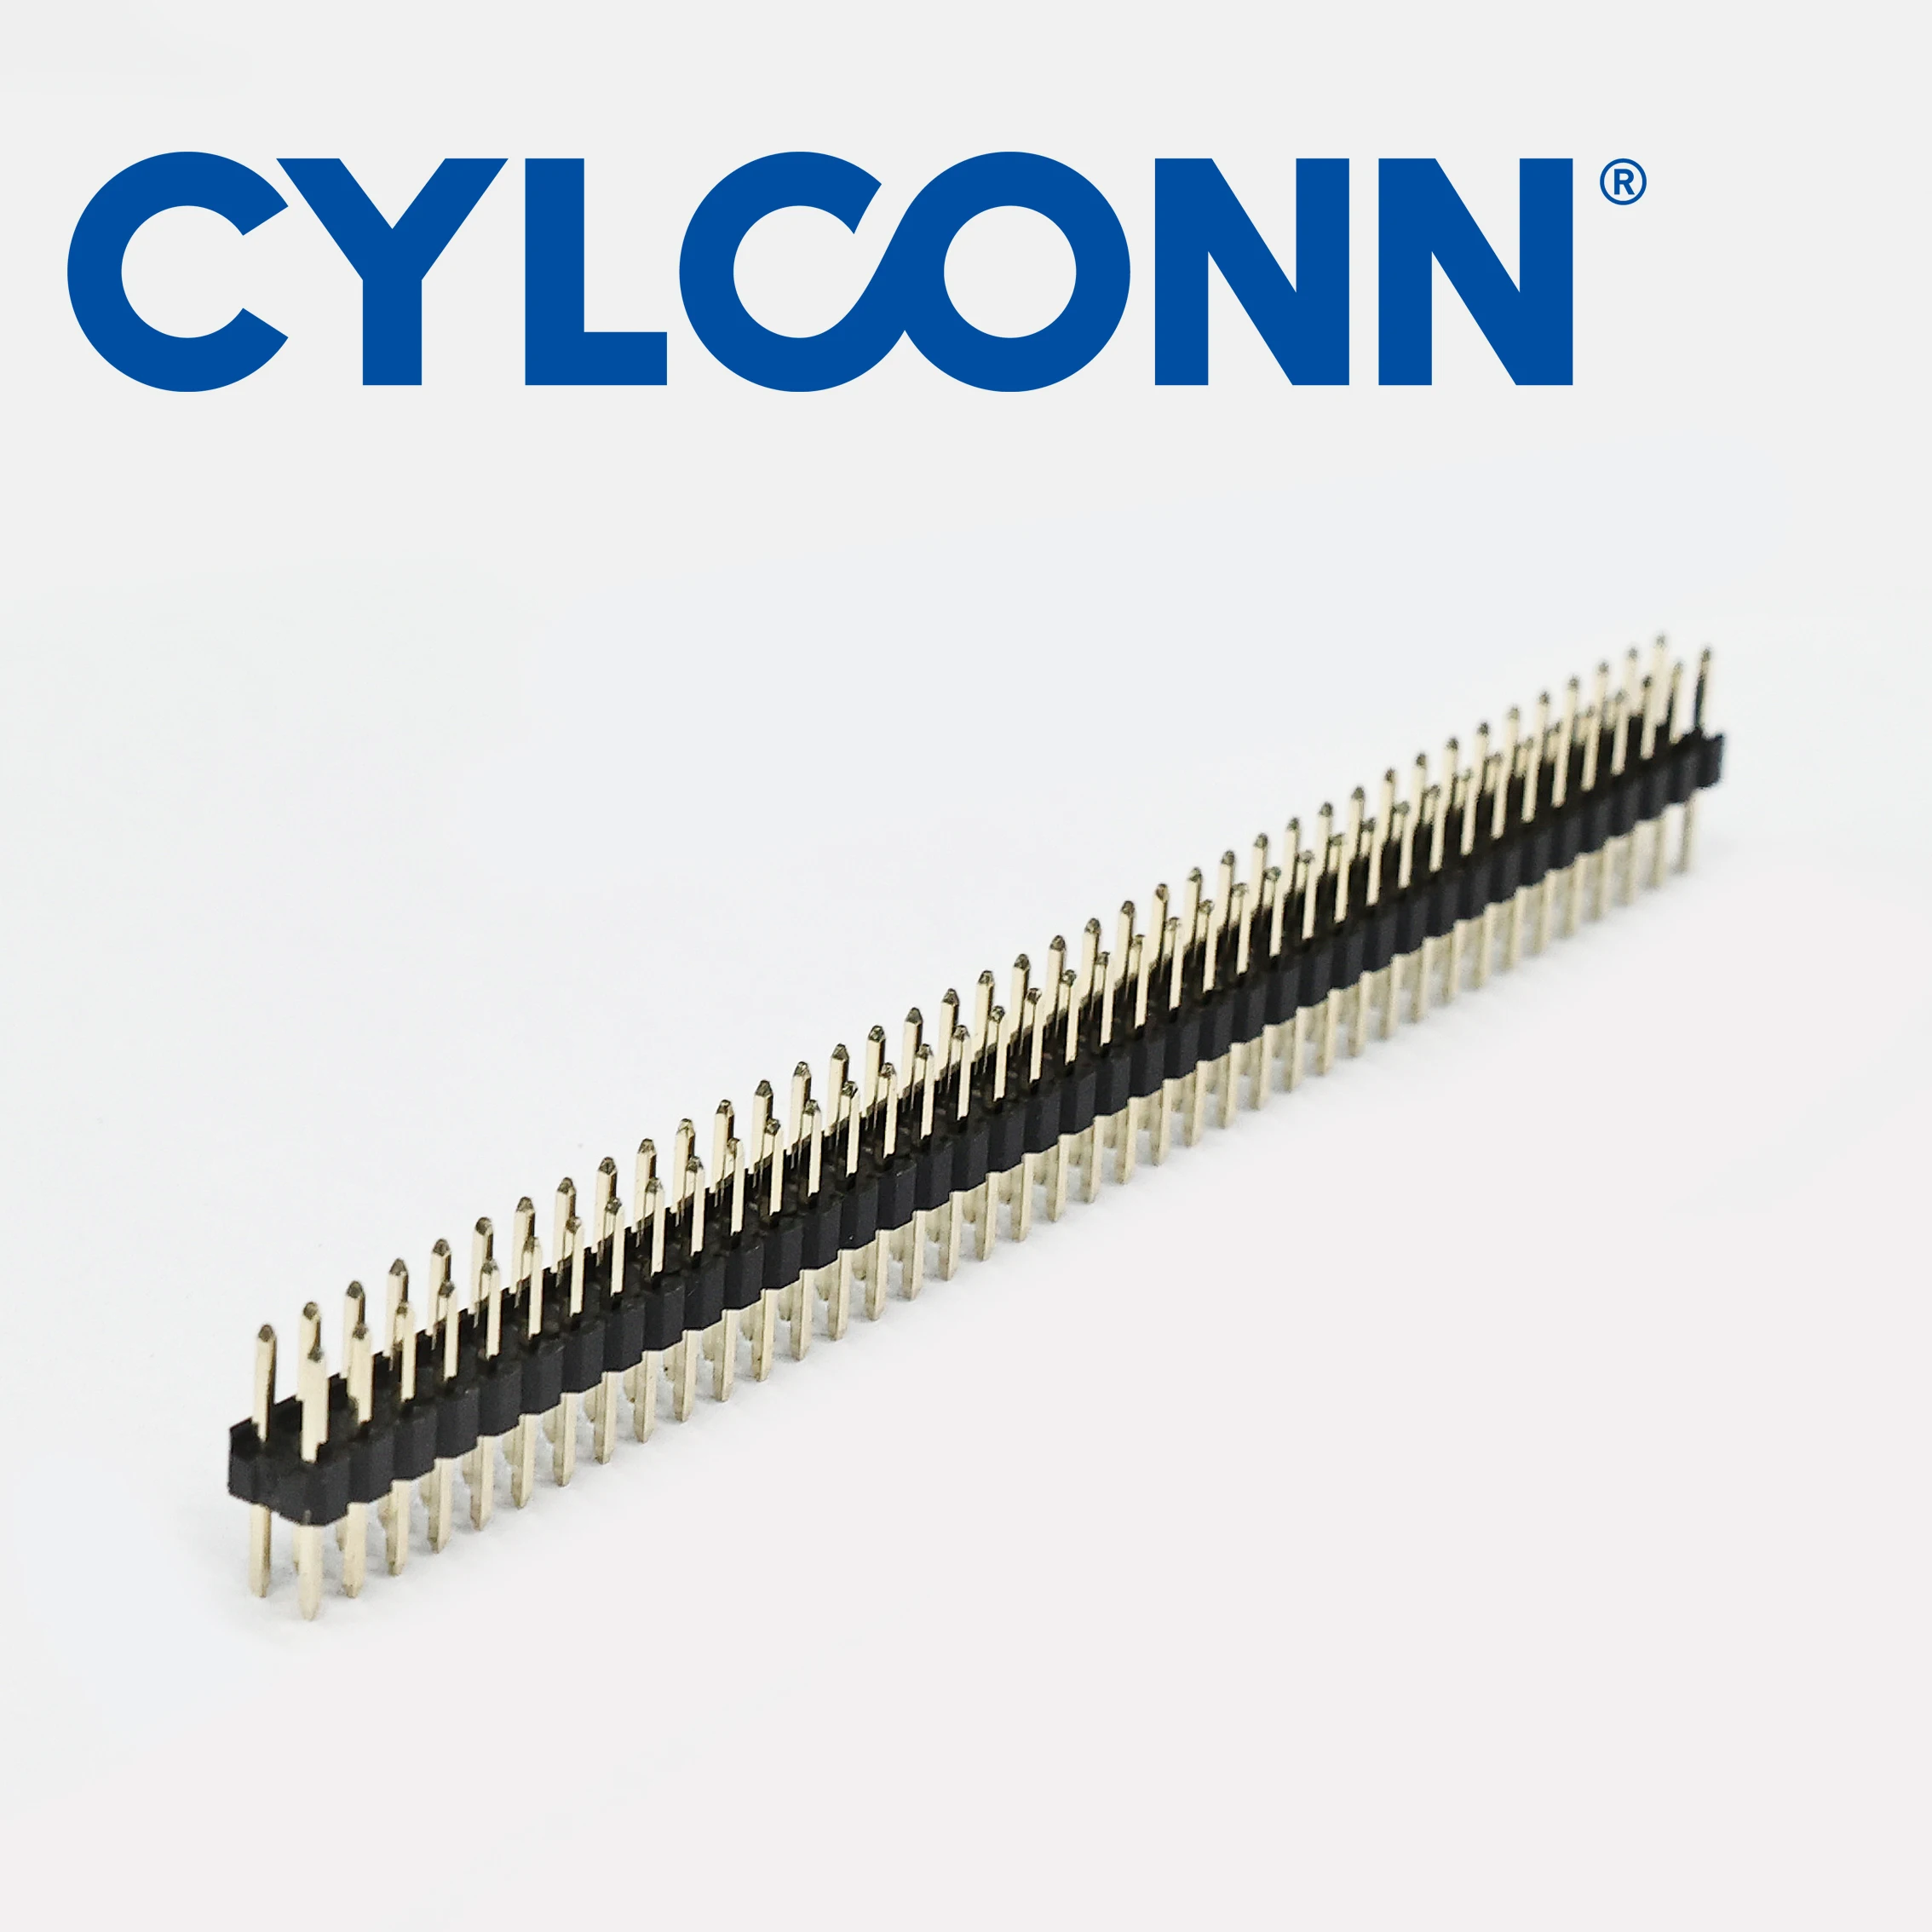 [CYLCONN] Manufacturers sell 2.0mm spacing double - row connector